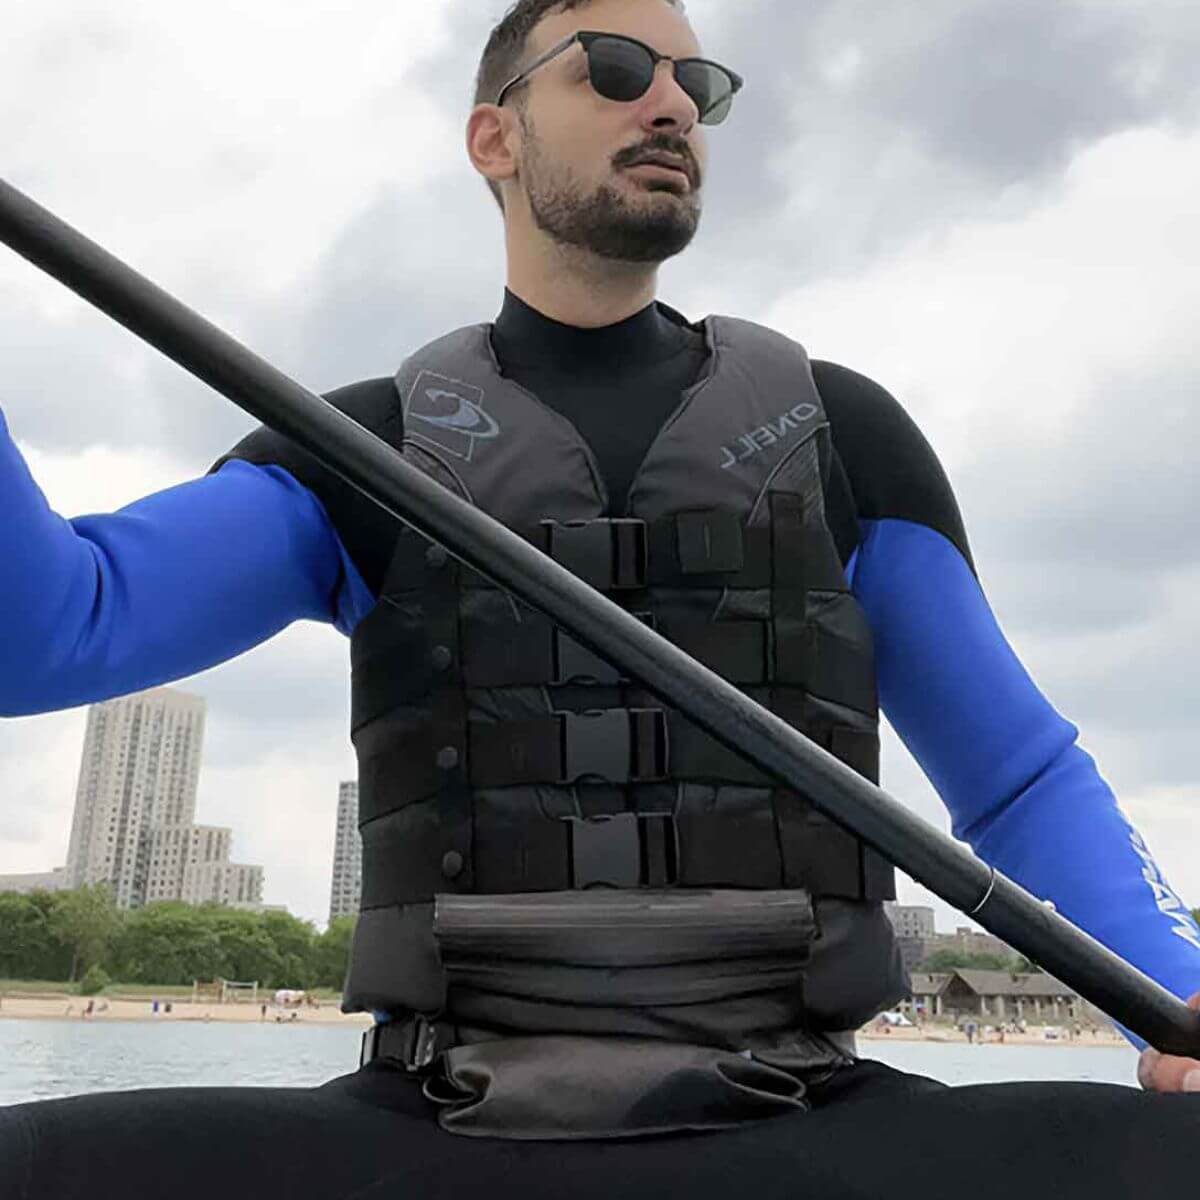 The Top 8 Kayak Life Vests To Keep You Safe And Stylish On The Water!